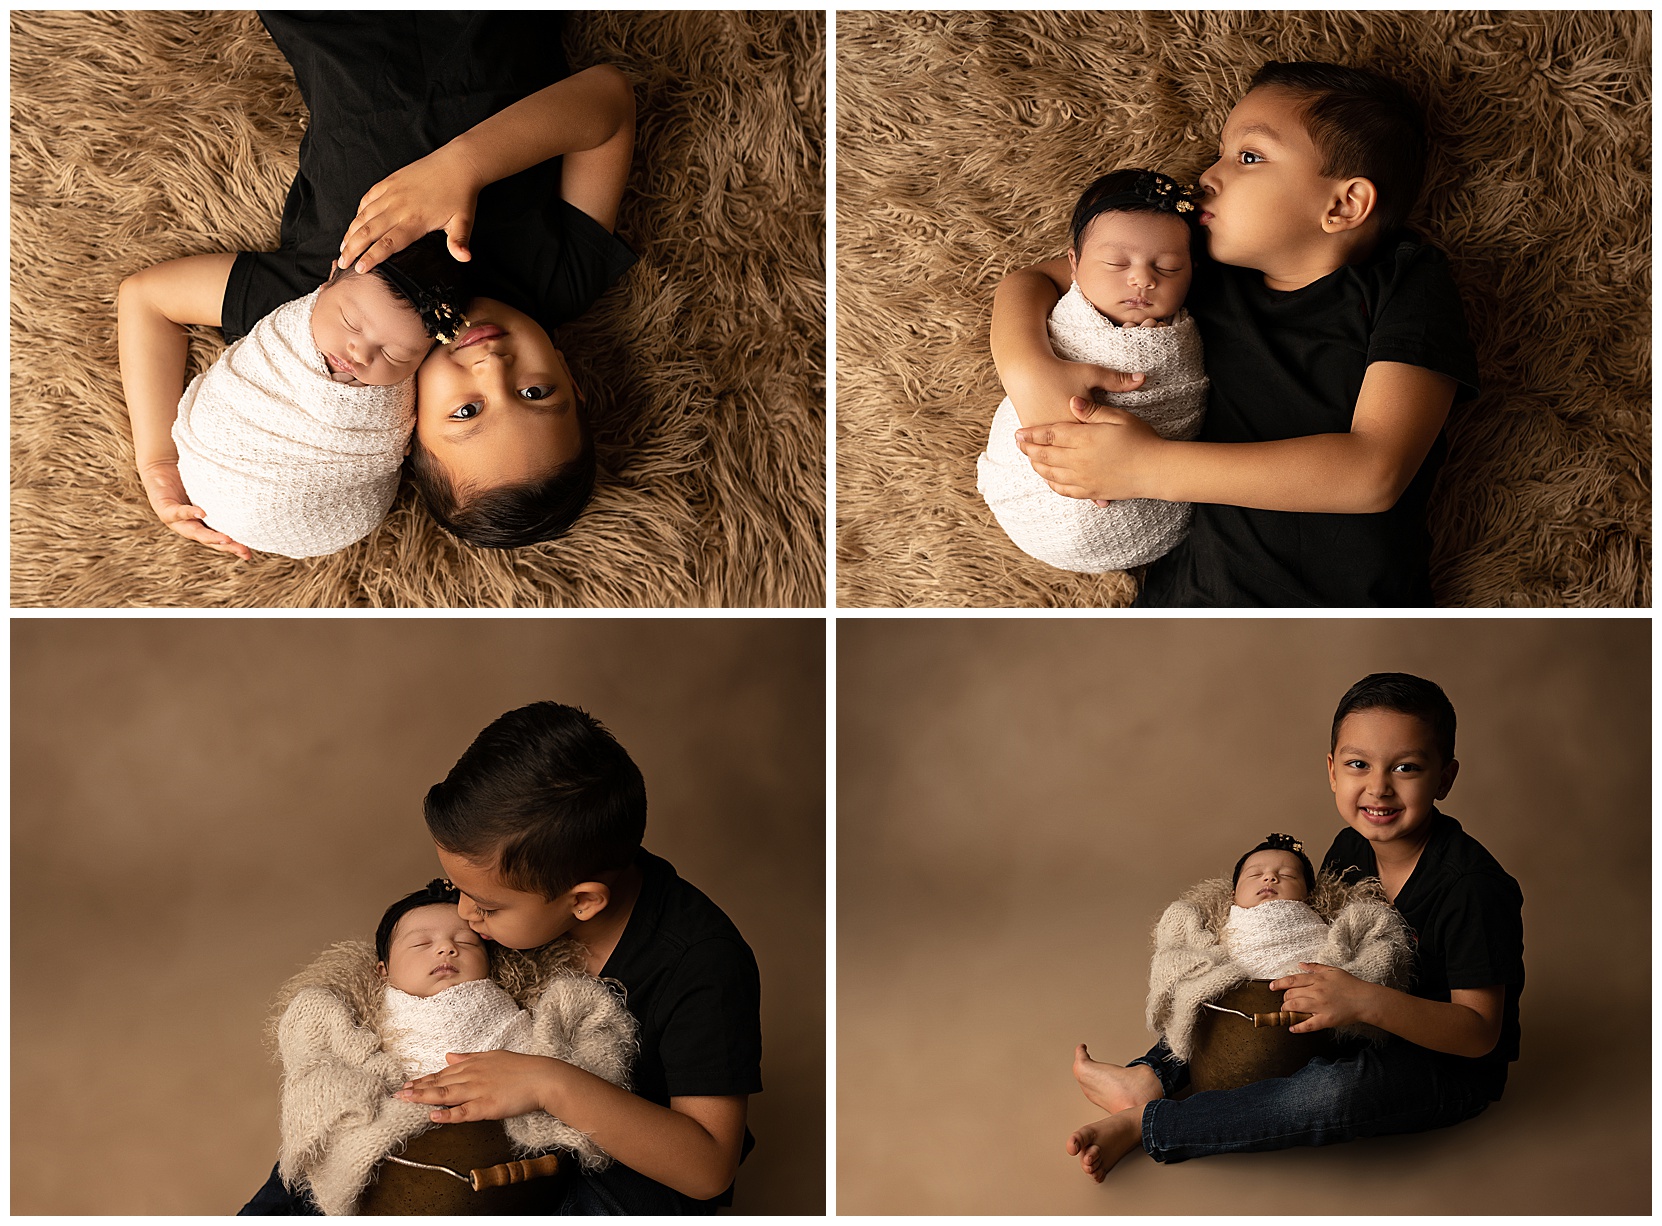 Set of four photos featuring a young boy in a black tee shirt holding his newborn sister swaddled in white cloth.